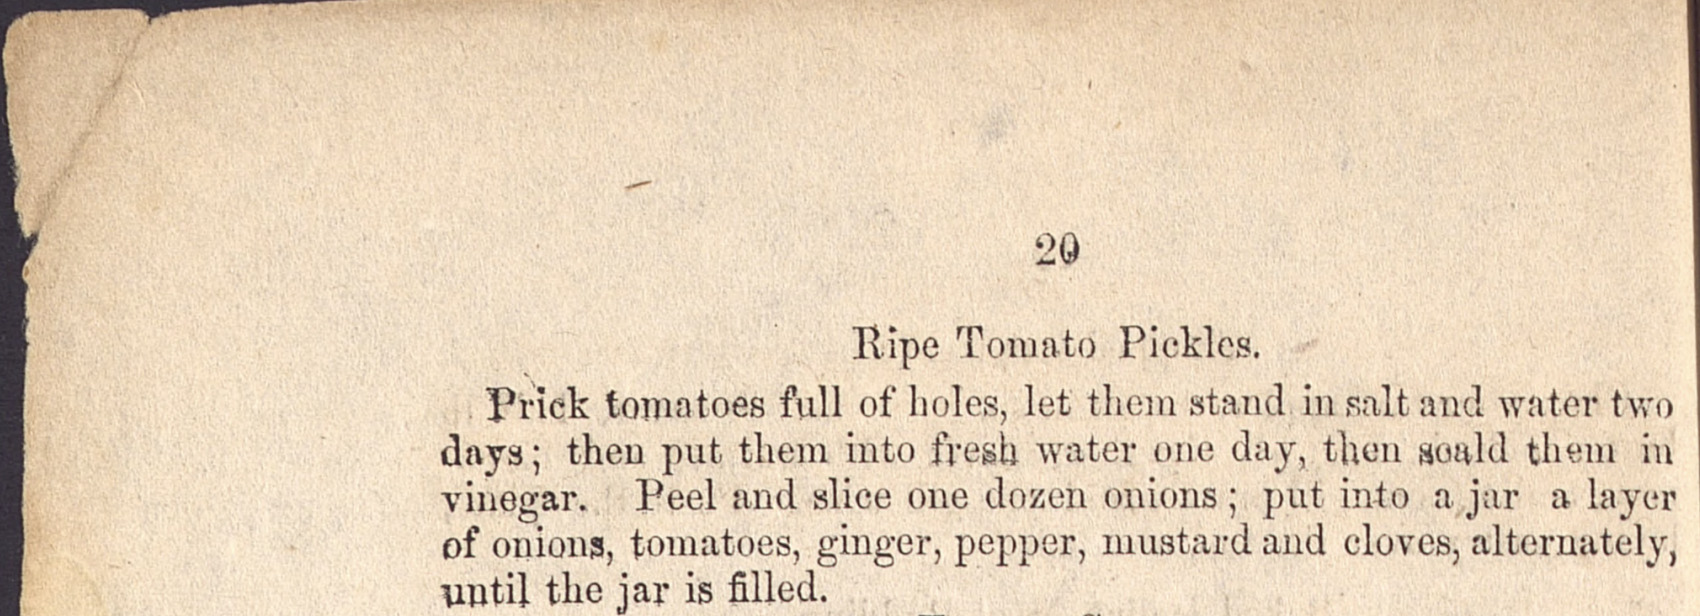 Malinda Russell's Tomato Pickles Recipe excerpt from her book